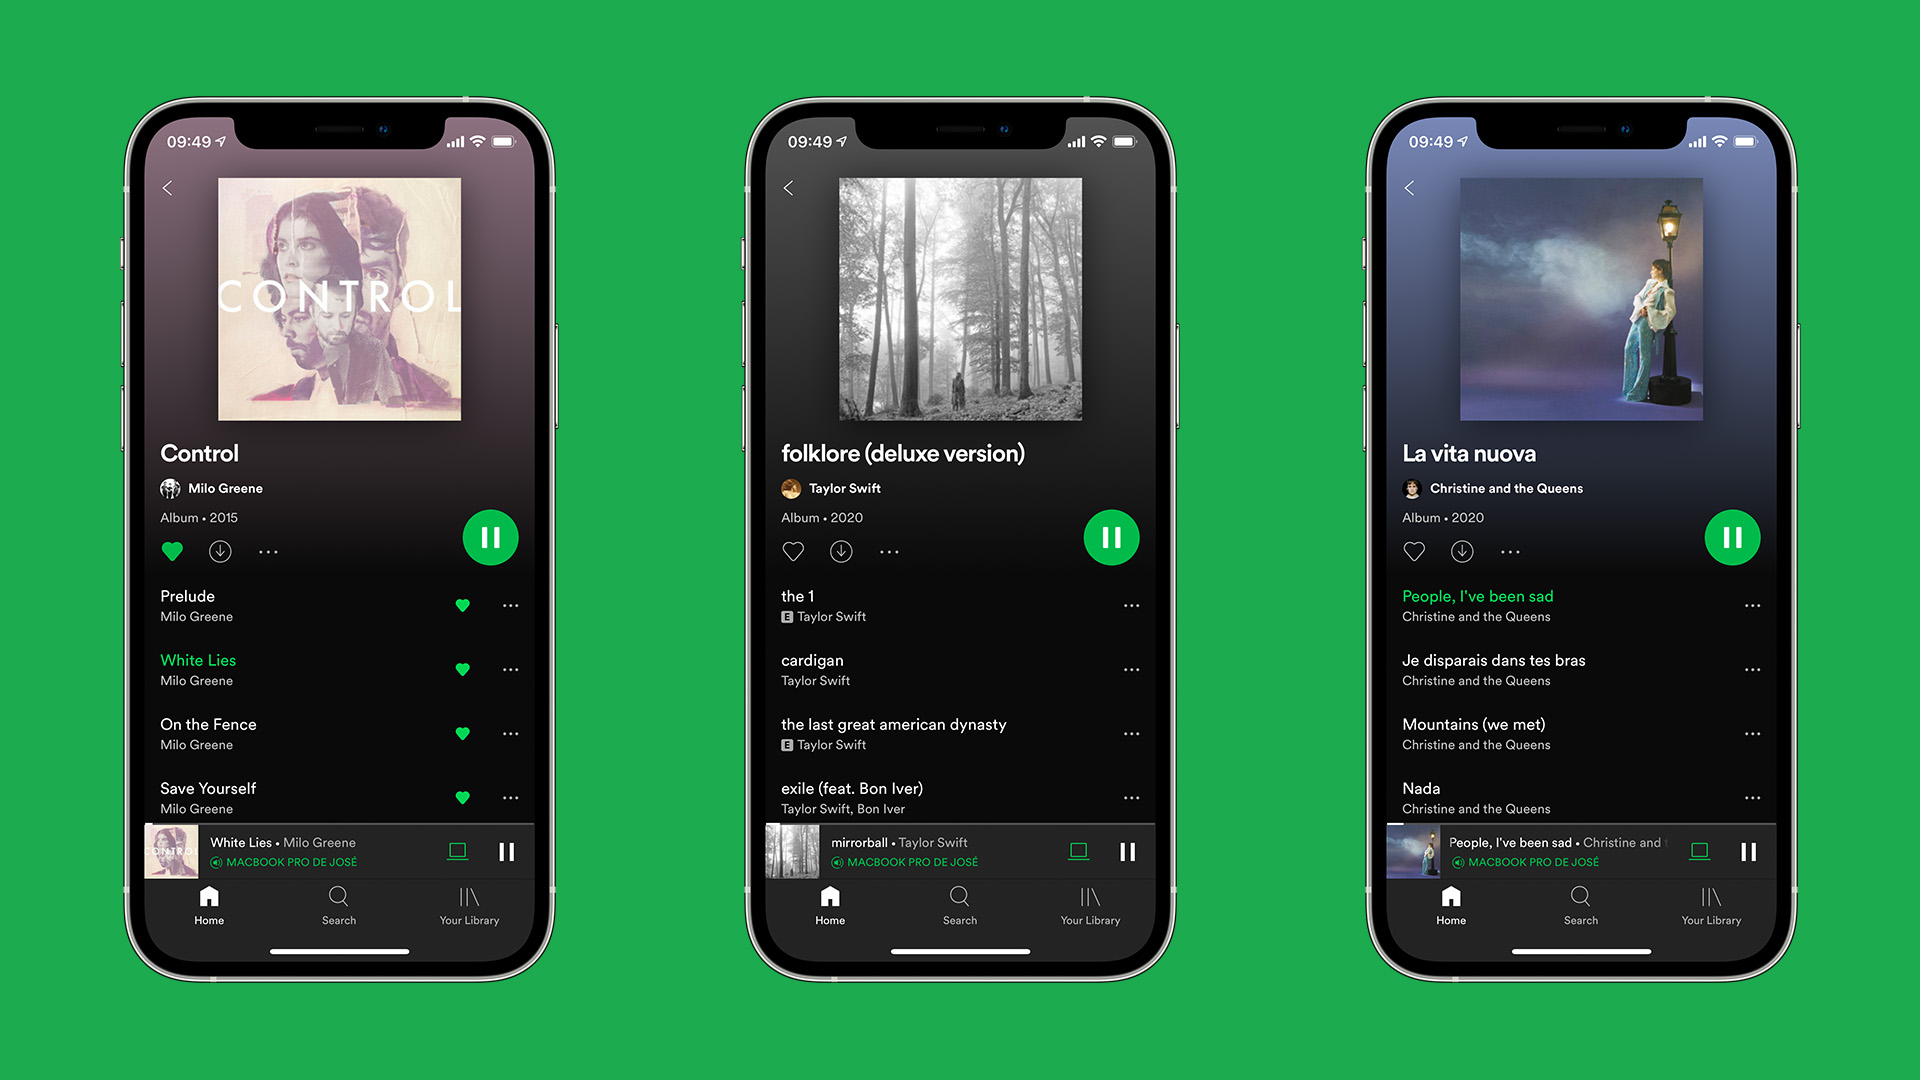 convert apple music to spotify